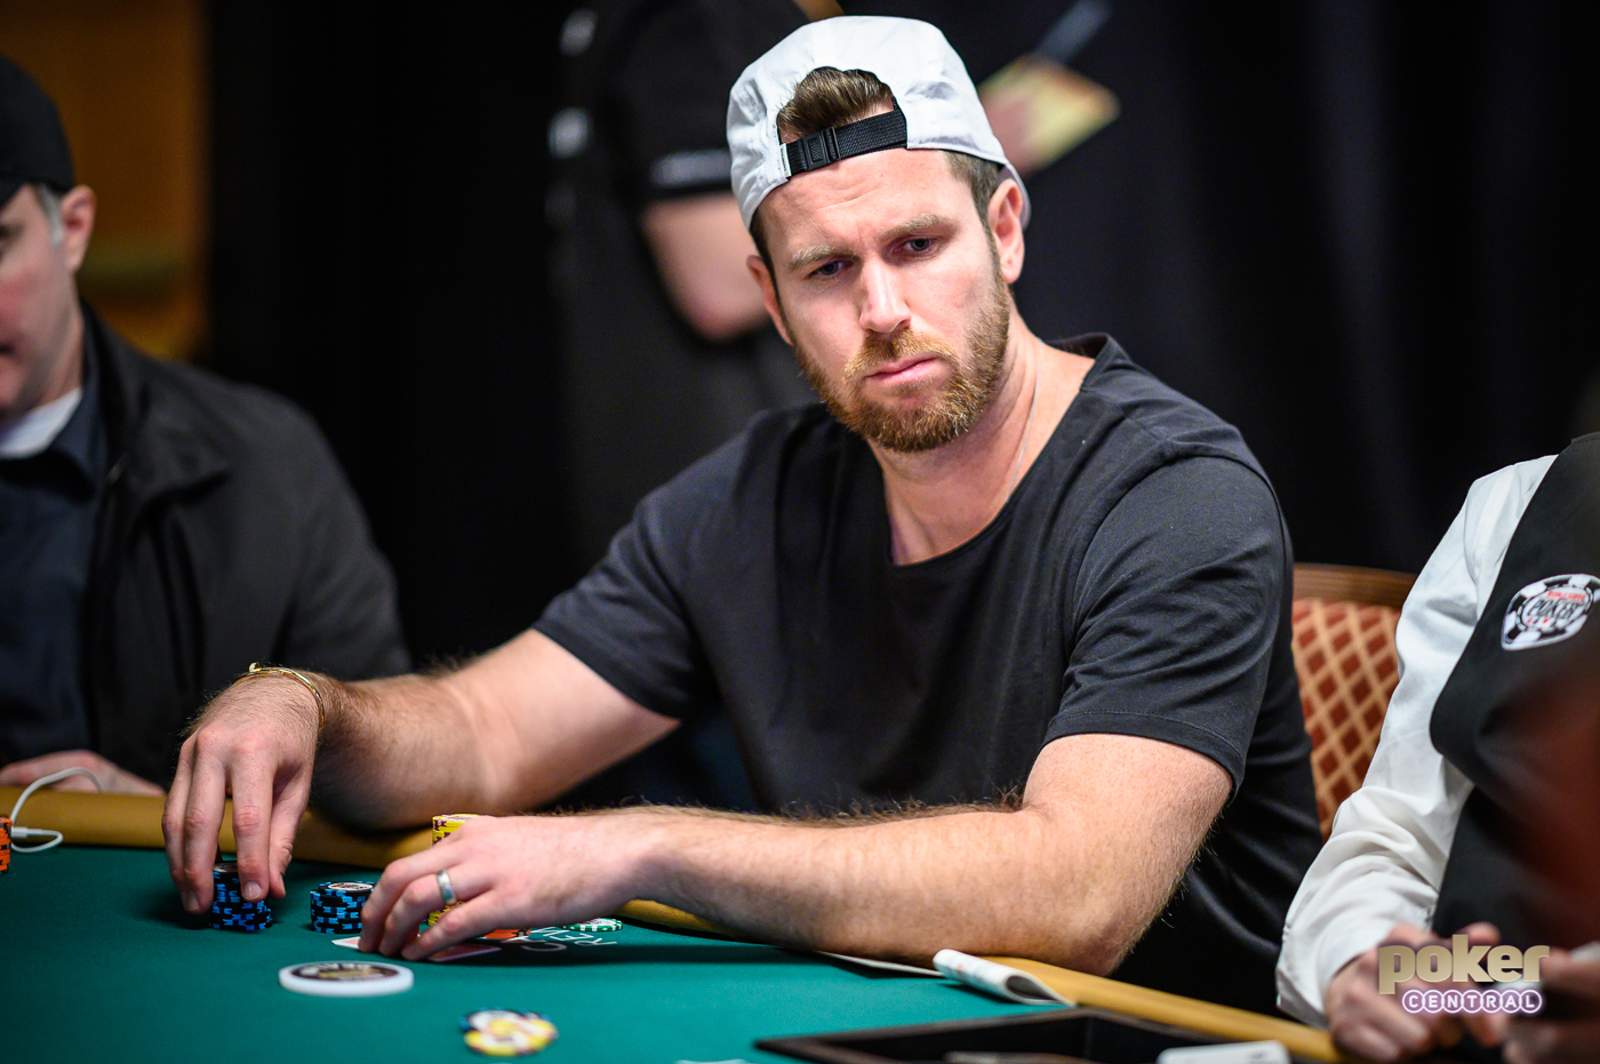 Black Reaches Out (For Silence), Racener Hates on Re-Entries & Negreanu Turns Whistle-Blower?